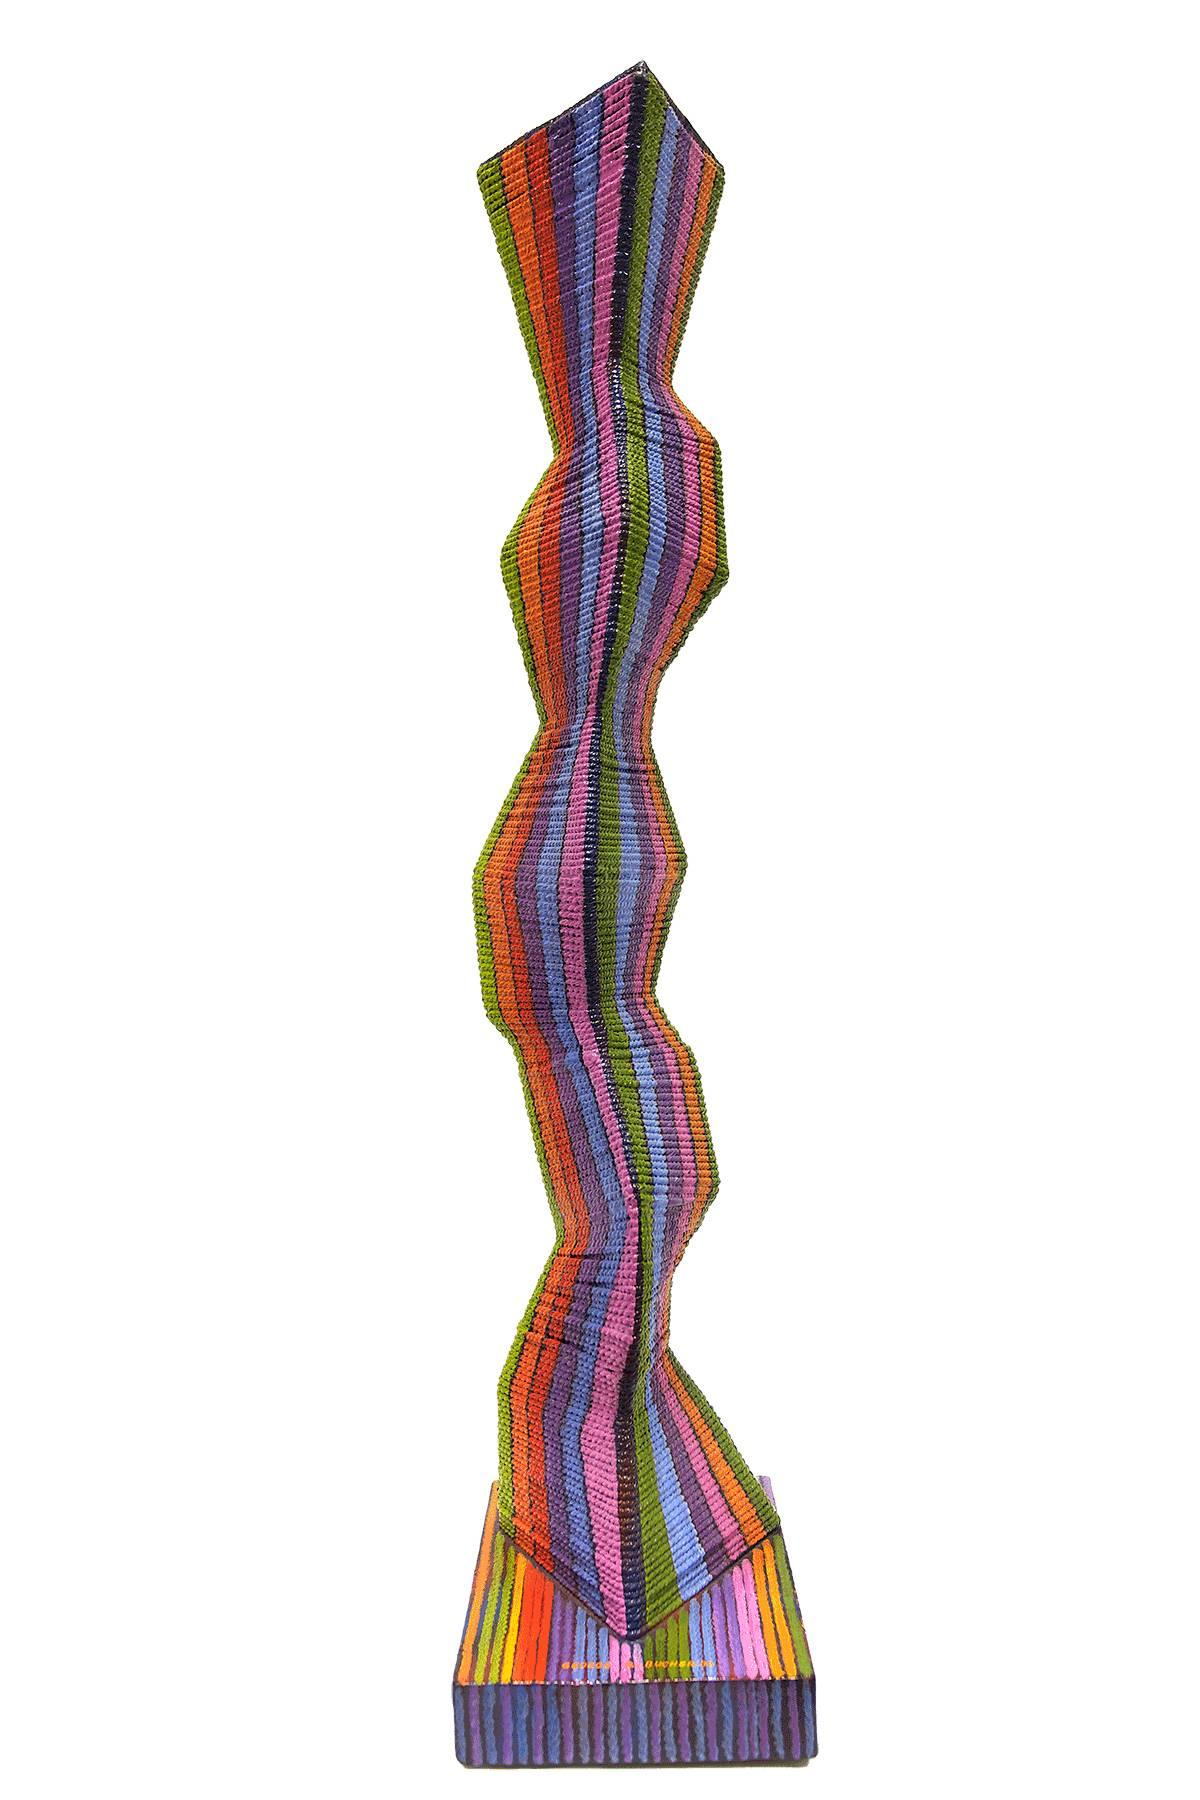 The artist George R. Bucher wraps twine around geometric, voluminous shapes to create a totem-like structure. After this Bucher painted the surface with vivid colors in an orderly manner.

Philadelphia artist George R. Bucher  1931-2015. Bucher was